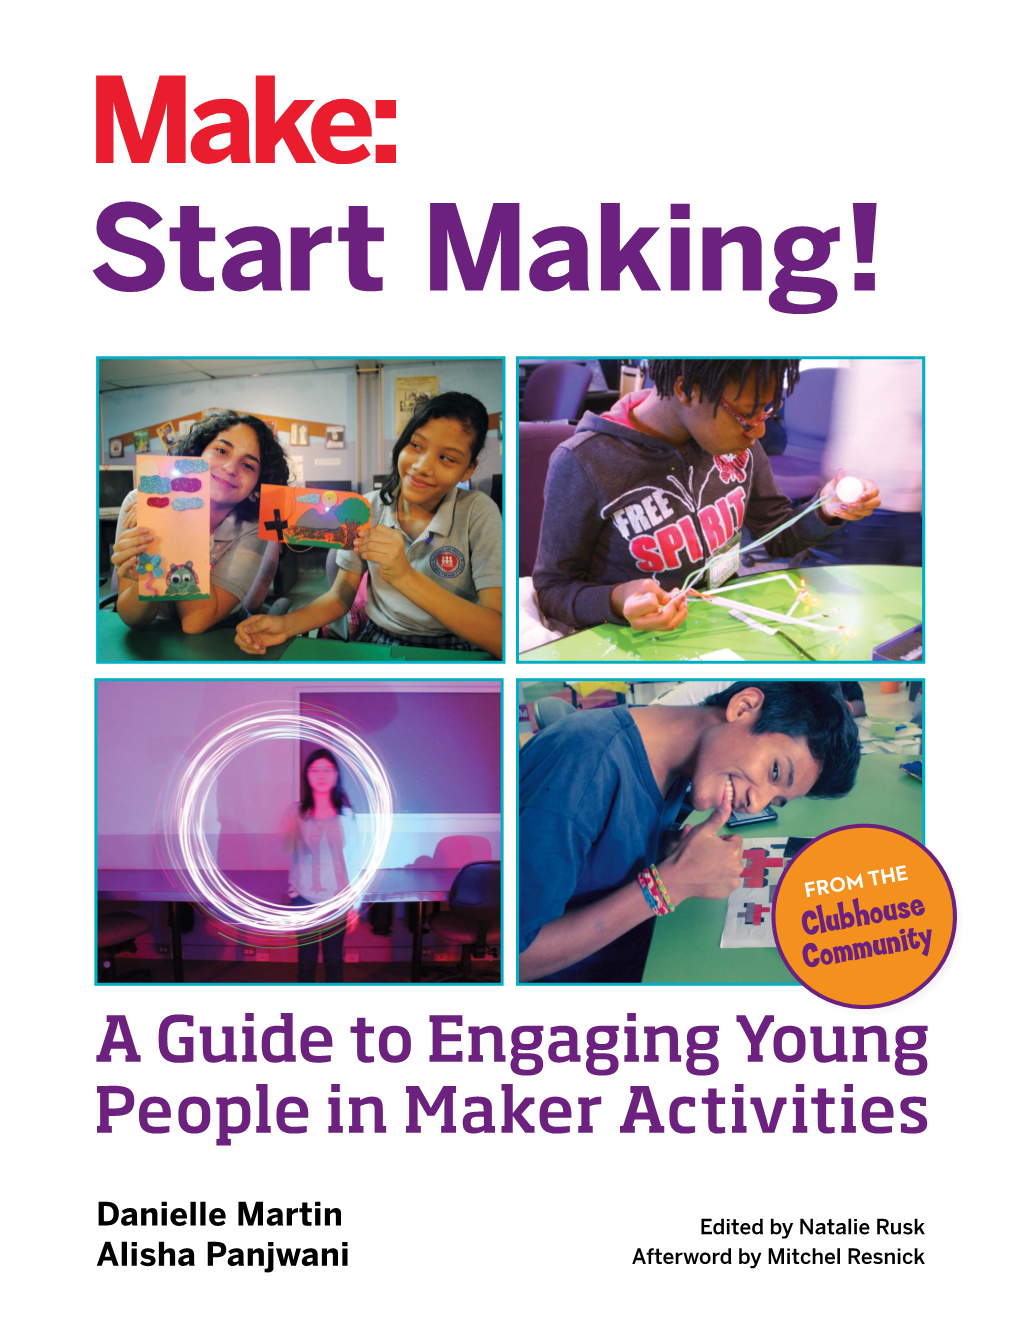 Start Making! Is a Program Developed by the Clubhouse Network to Engage Young People All Over the World in Maker-Inspired Activities